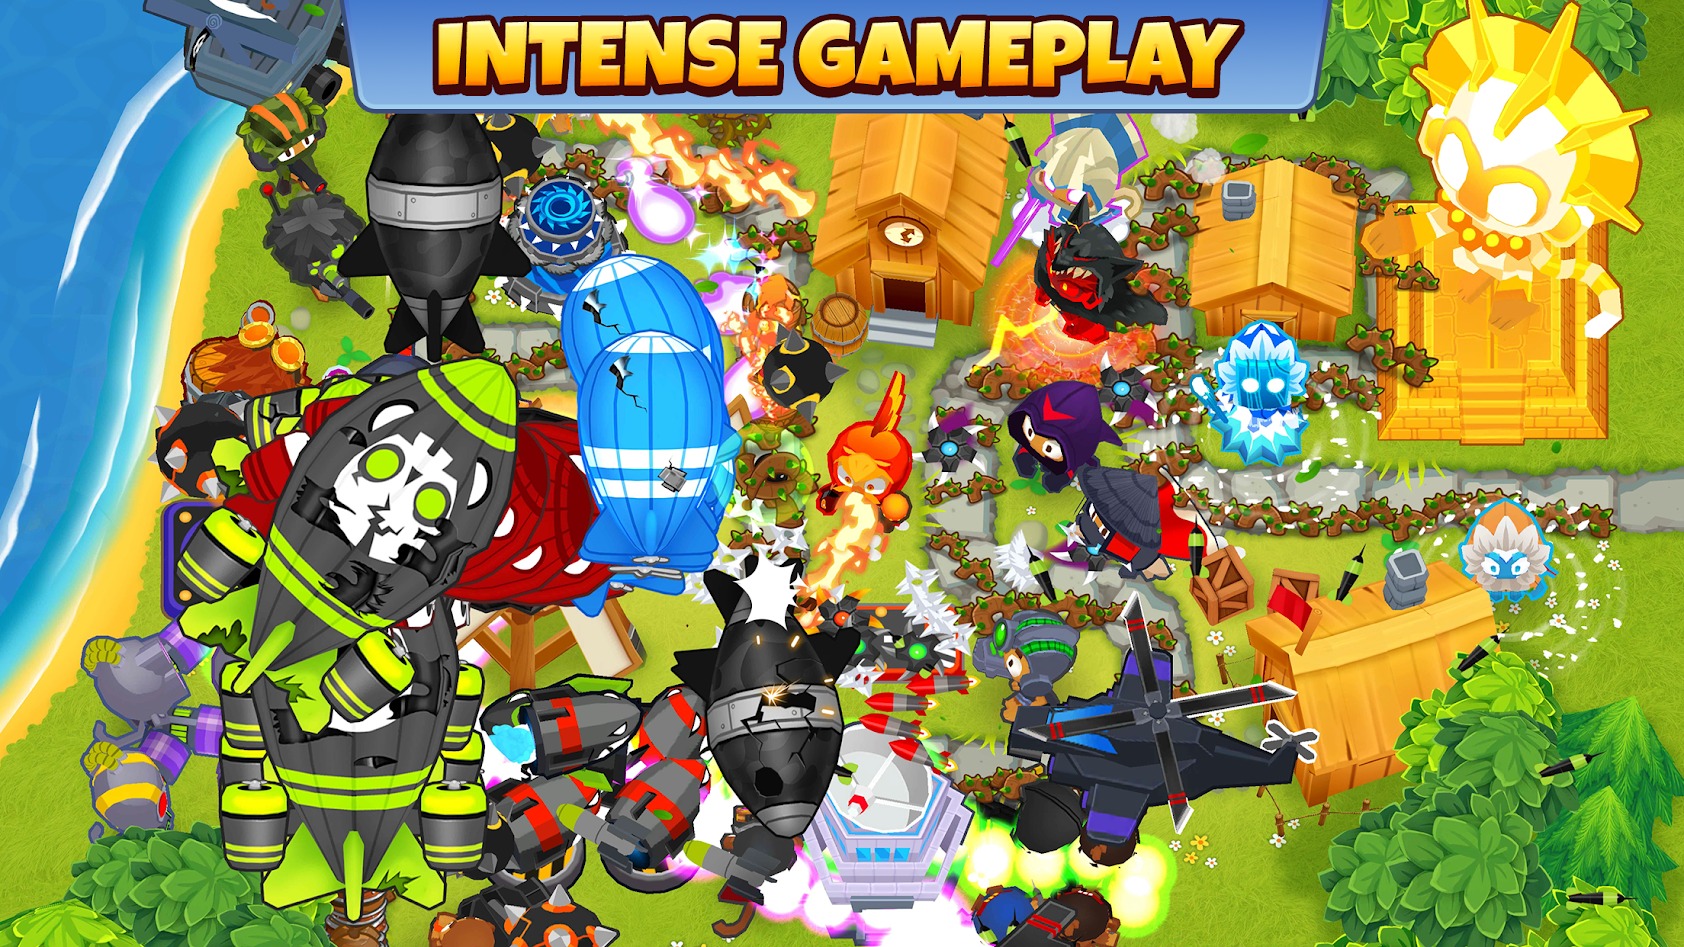 bloons tower defense 5 unblocked weebly